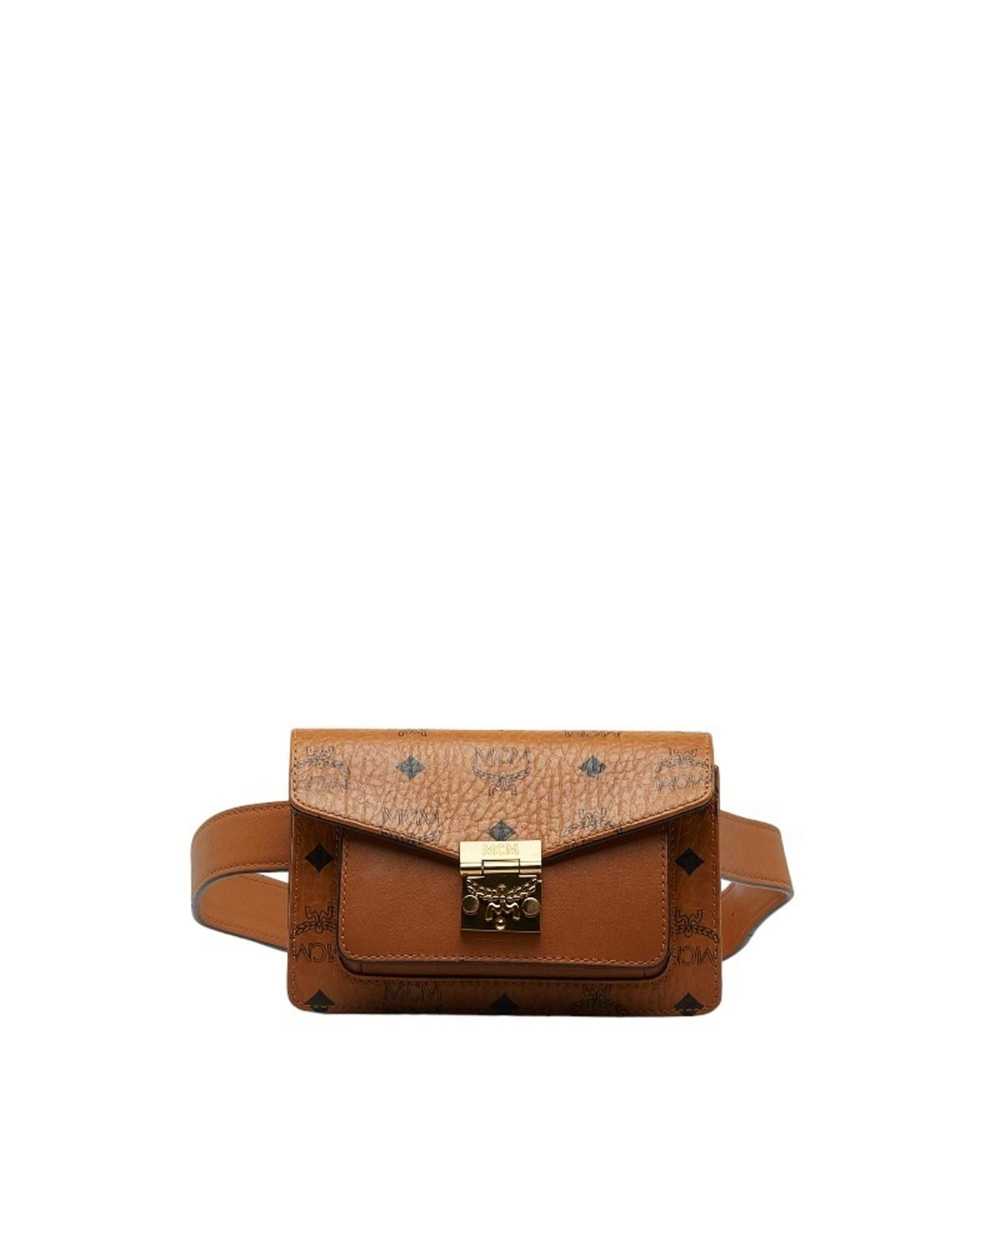 MCM Brown Leather Fanny Pack - image 1